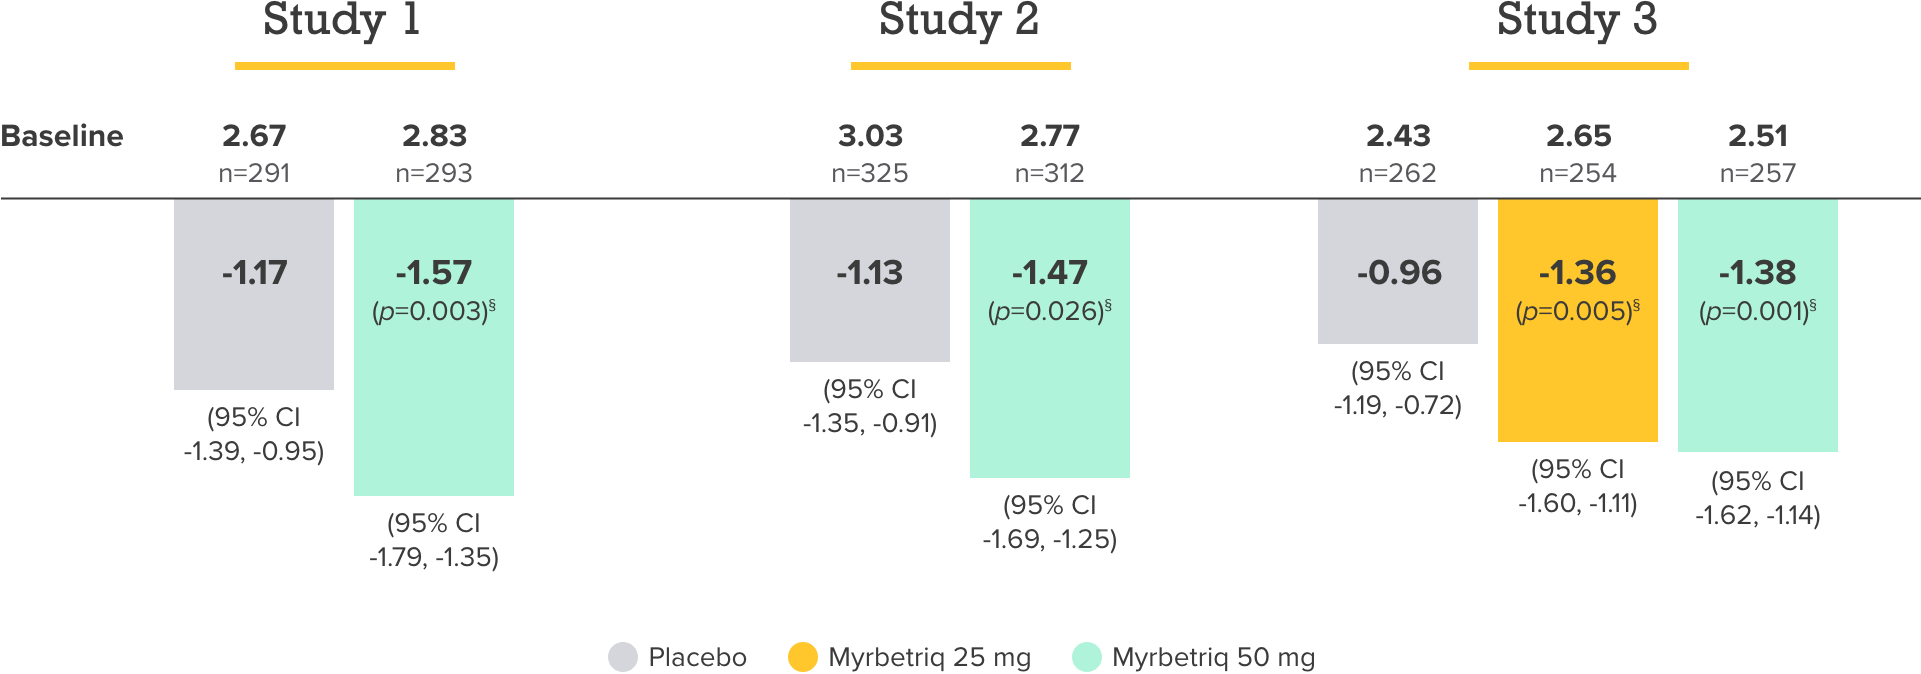 MYRBETRIQ (mirabegron) Clinical Study Results: Reduced Incontinence